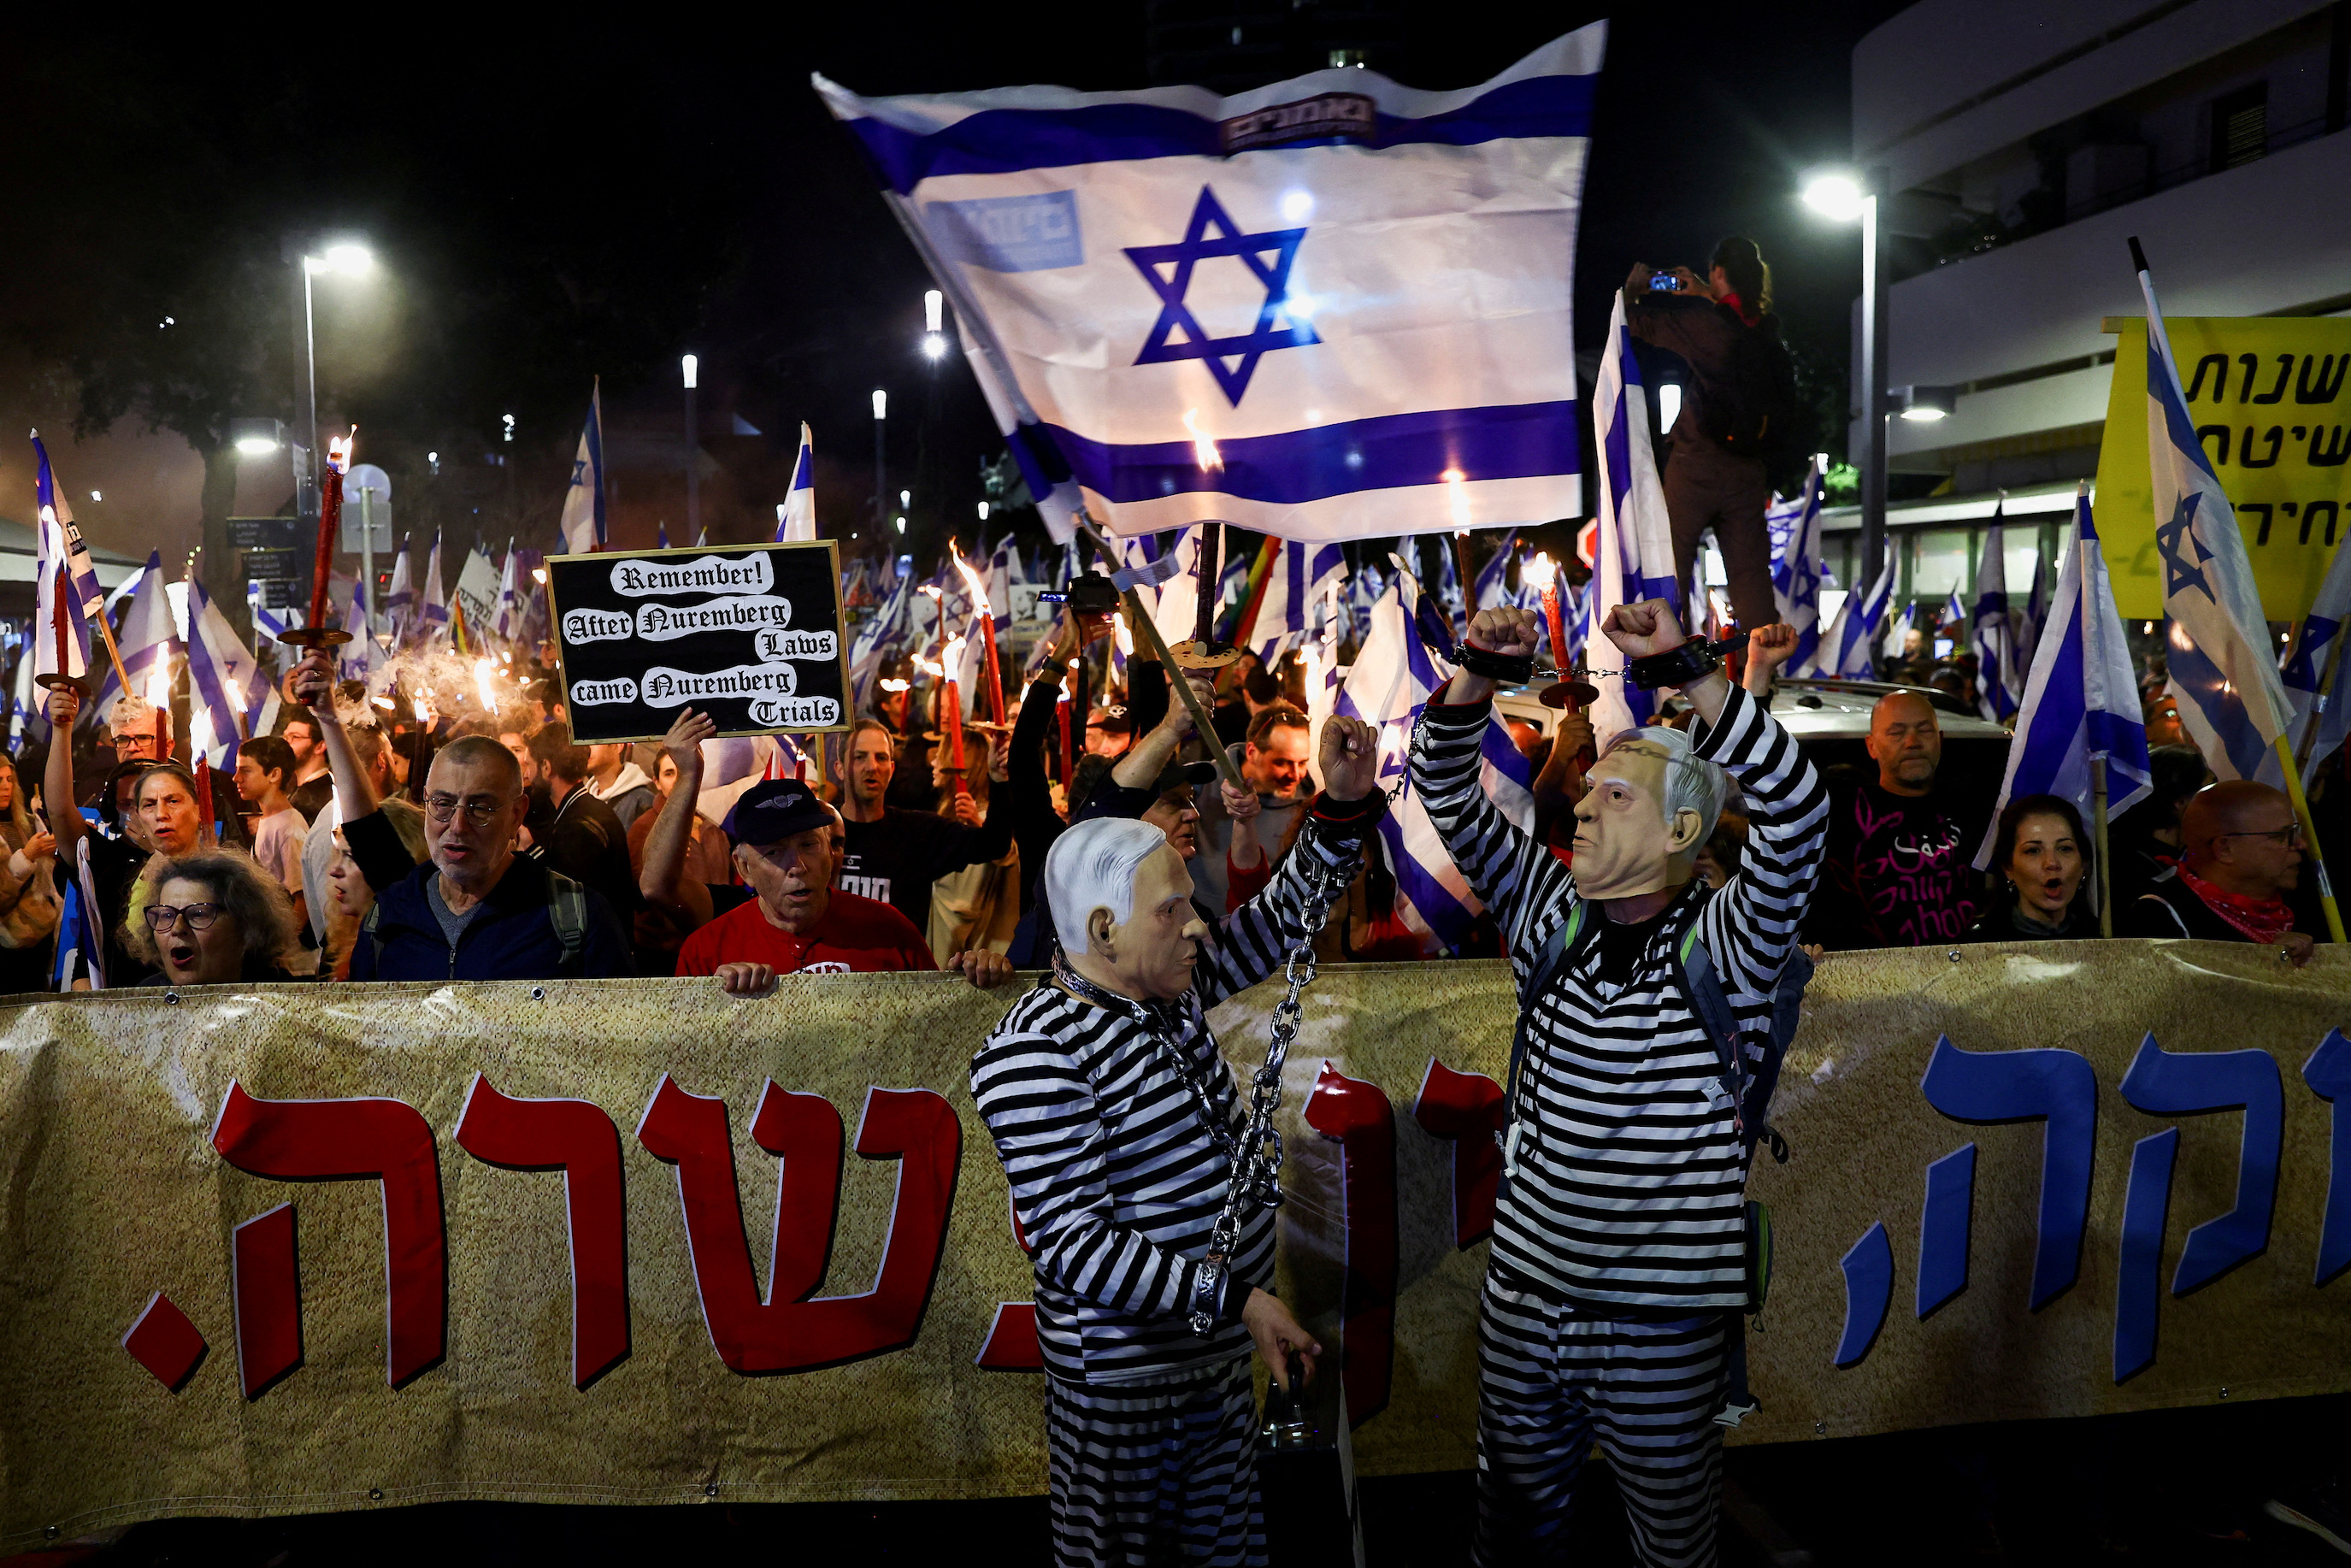 Israeli protesters gather for last 11 weeks against judicial changes